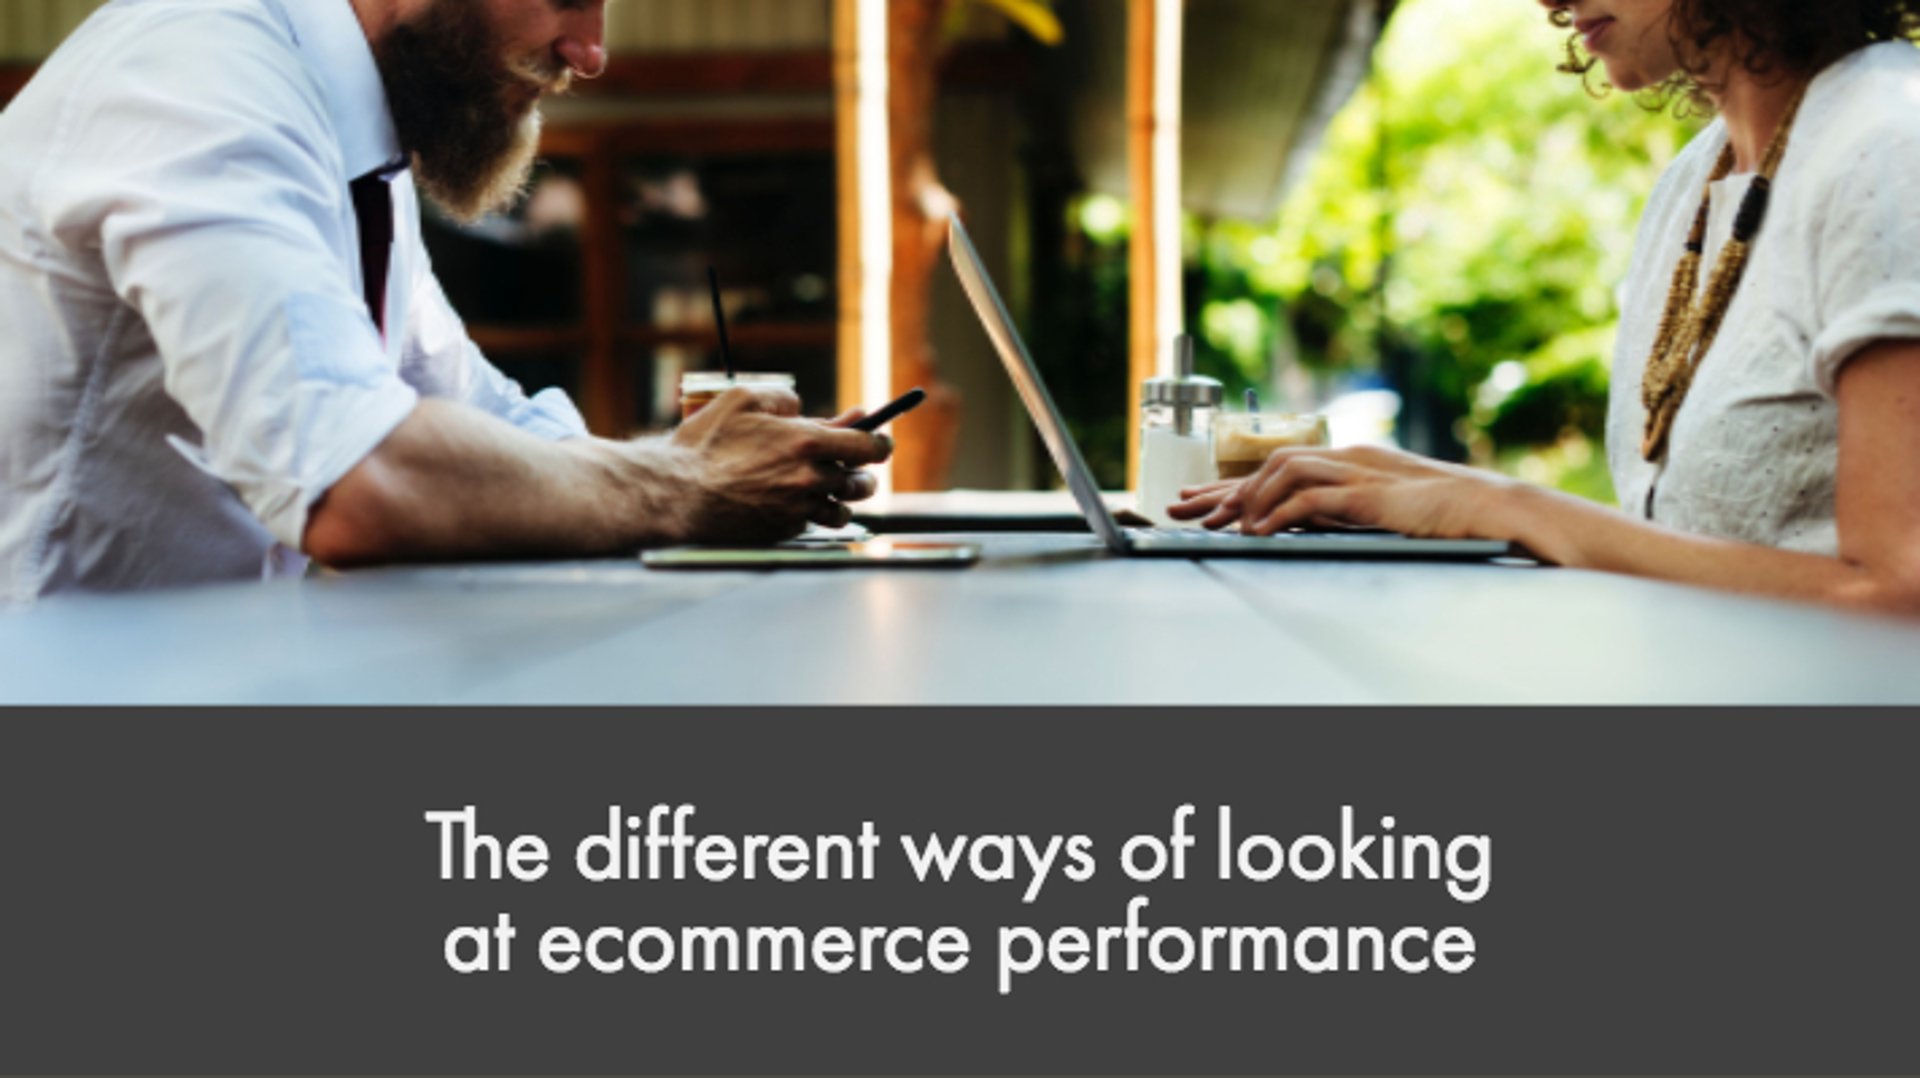 Ways of Looking at Ecommerce Performance